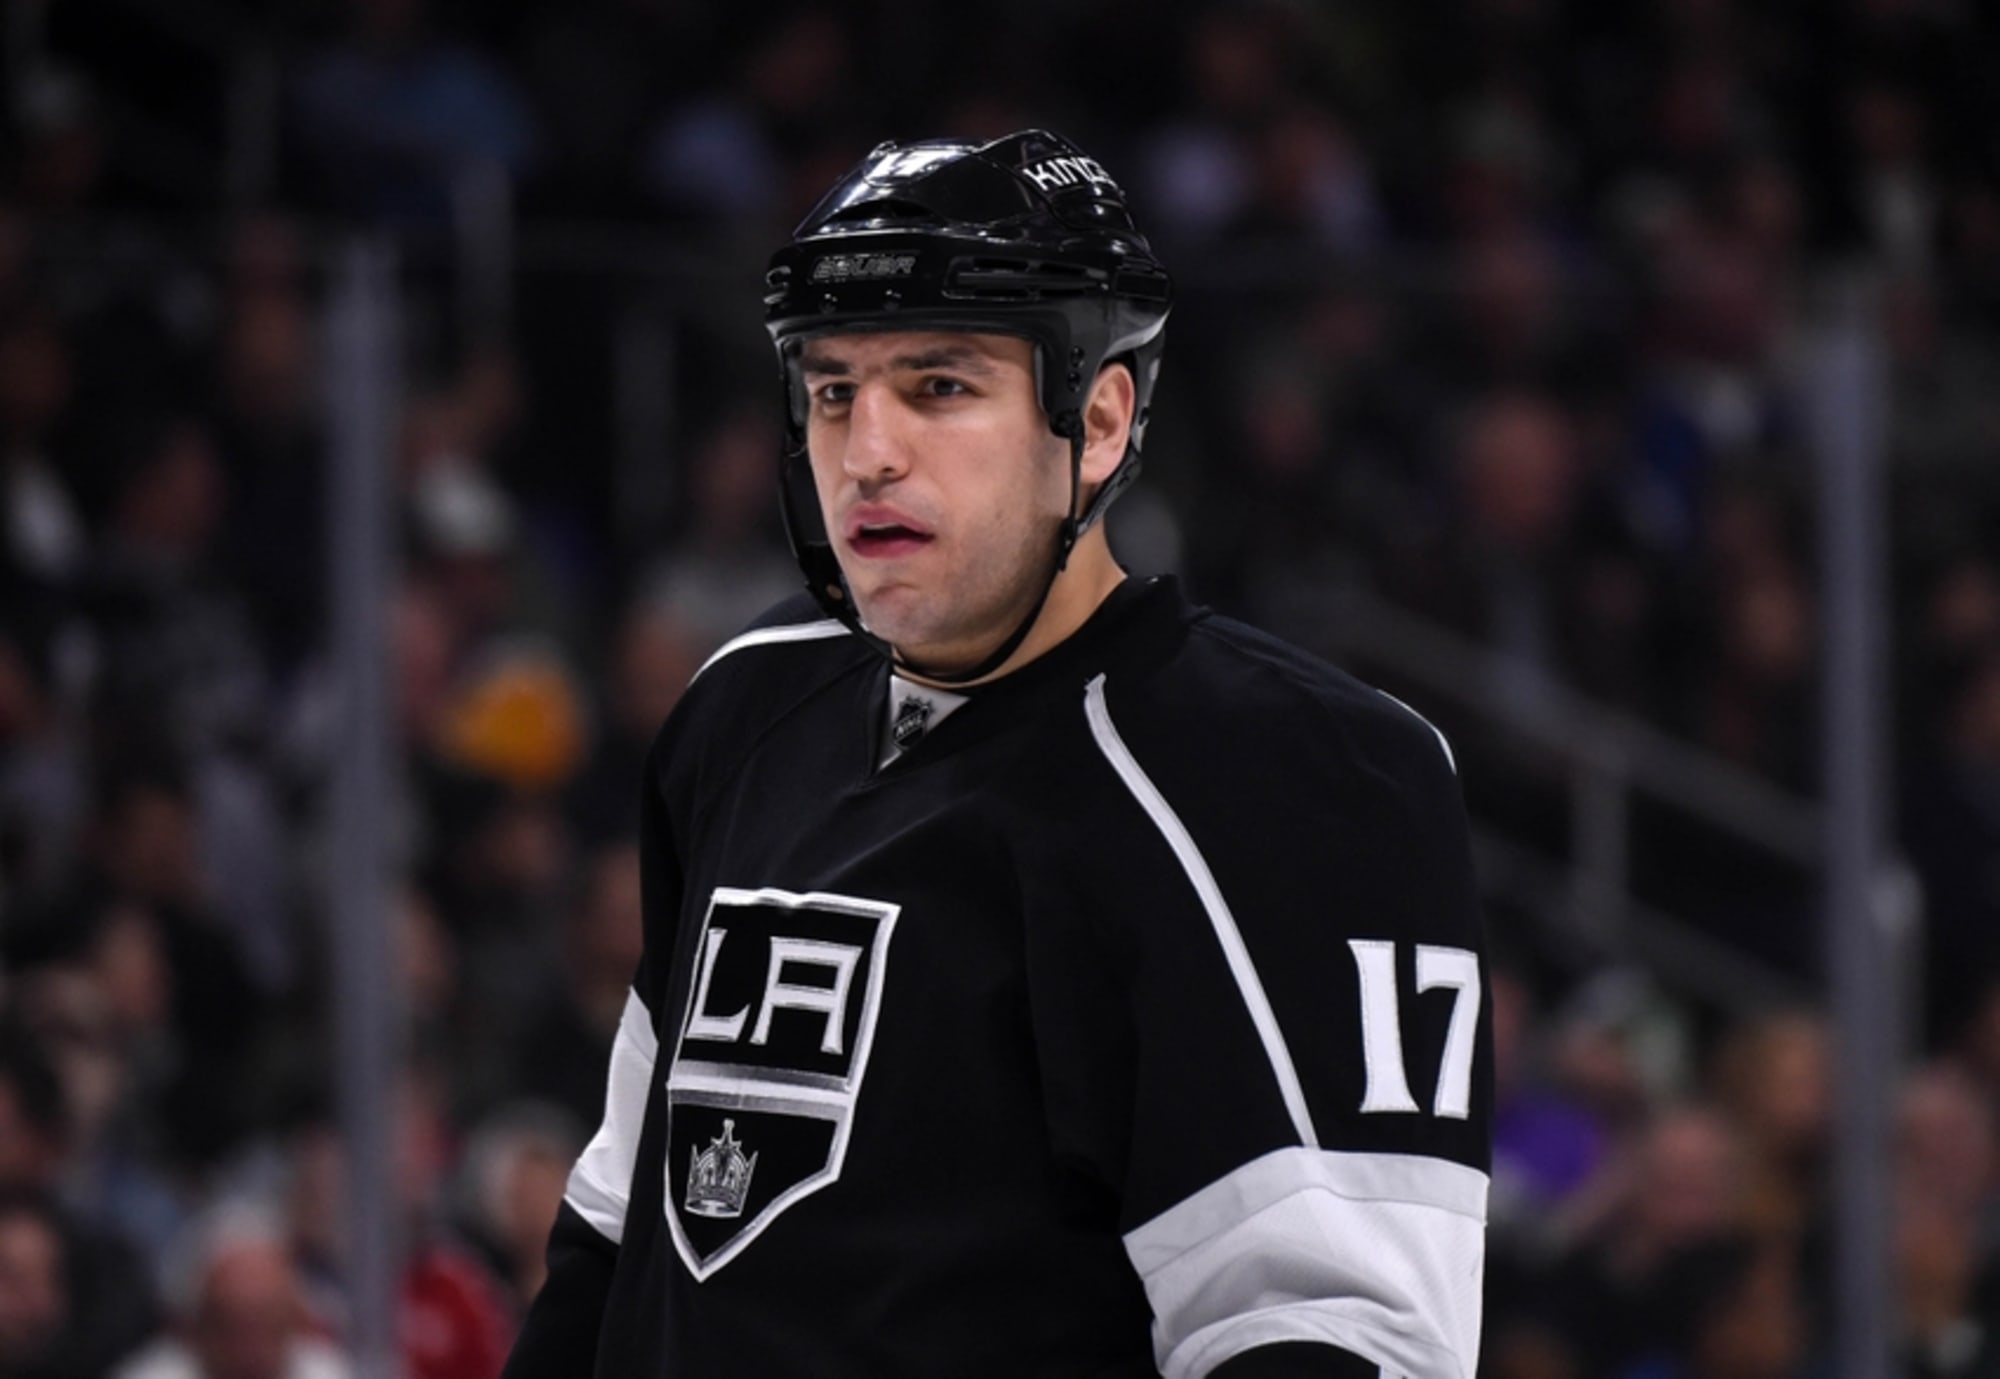 NHL free agency: Milan Lucic signs with Oilers